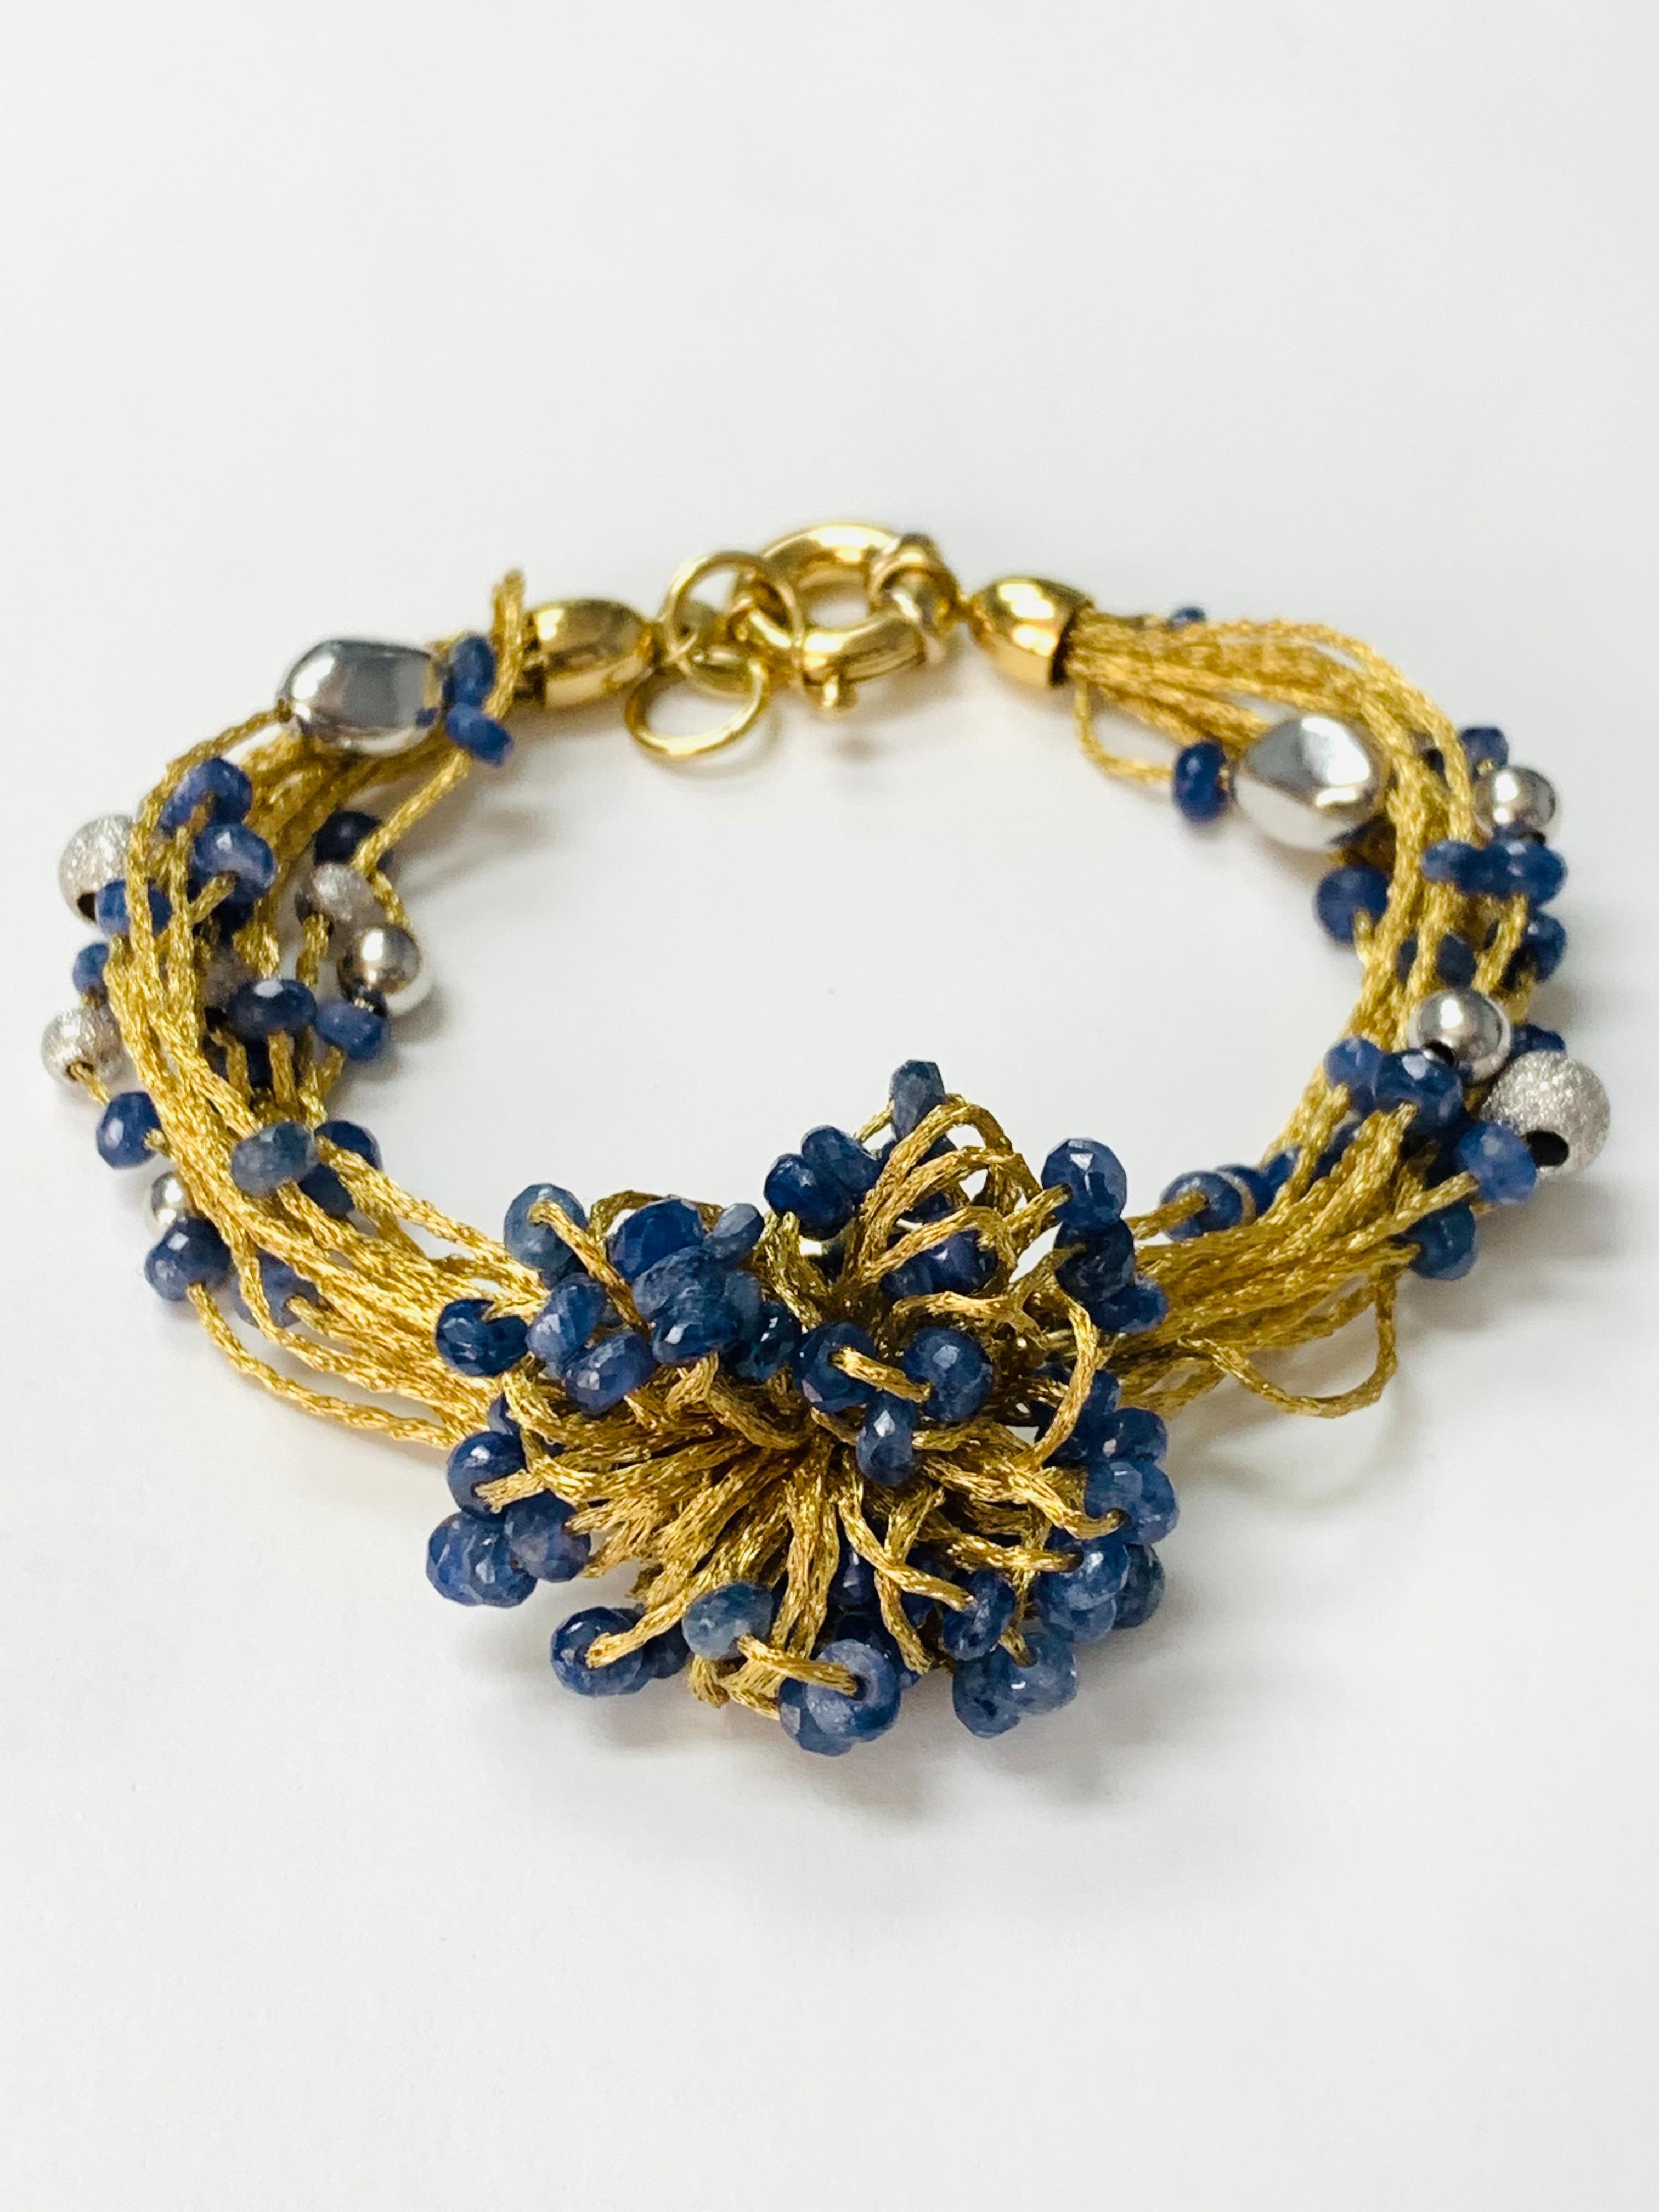 Unique Blue sapphire beads , white gold and yellow gold bracelet. 
The details are as follows : 
Blue sapphire beads weight : 15 carat 
Metal : 18k gold 
Gold weight : 31 grams 
Measurements : 7.5 inches 
